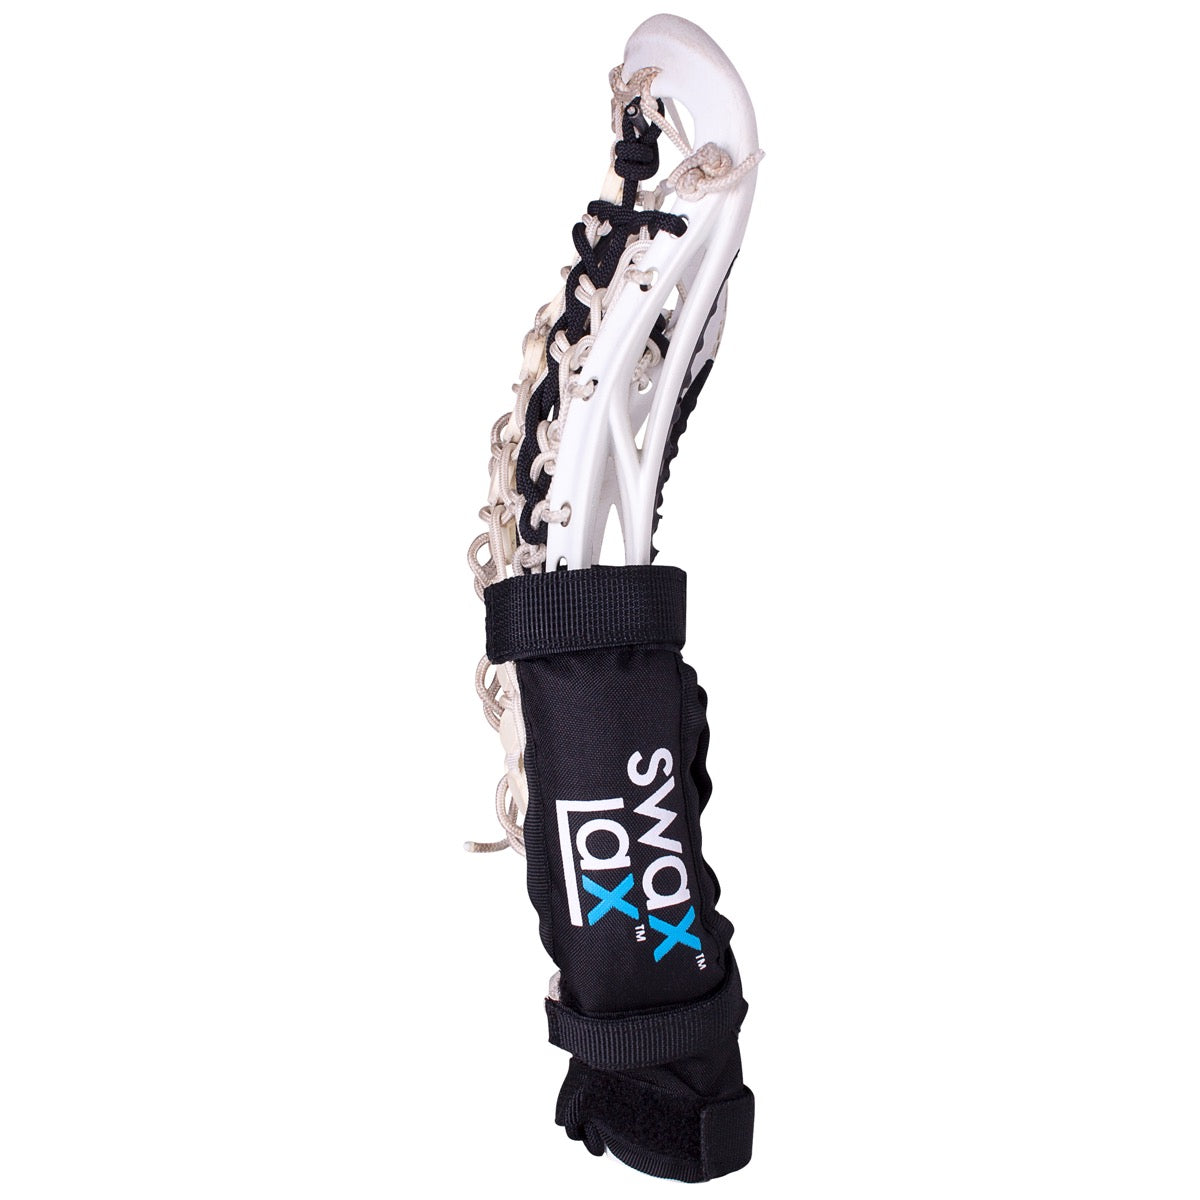 Swax Lax Power Weights shown on girls lacrosse stick - side view